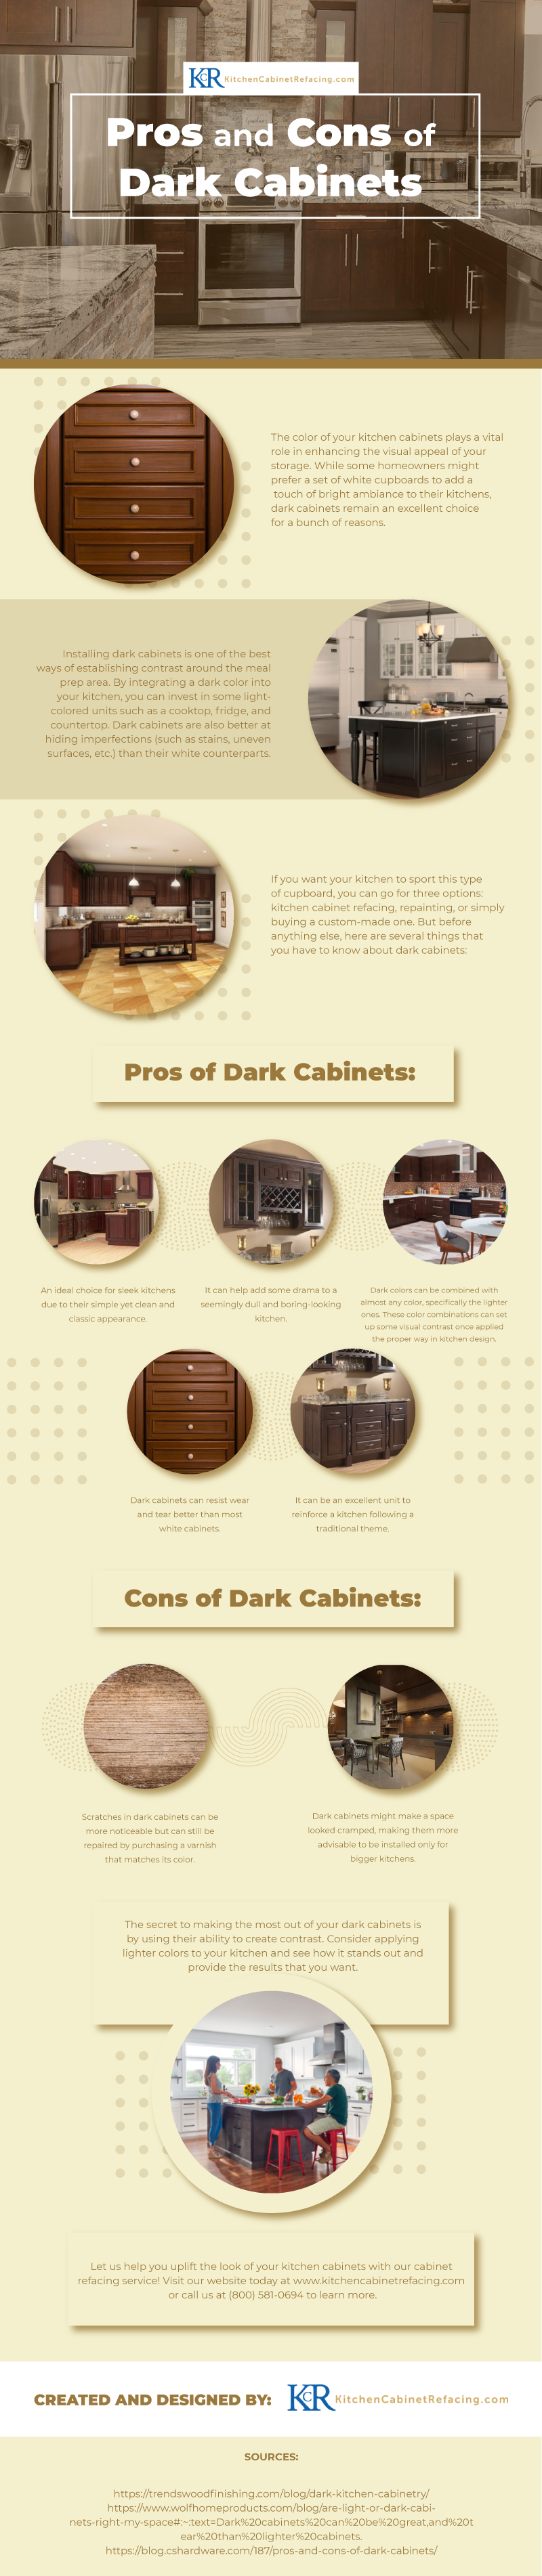 Pros and Cons of Dark Cabinets